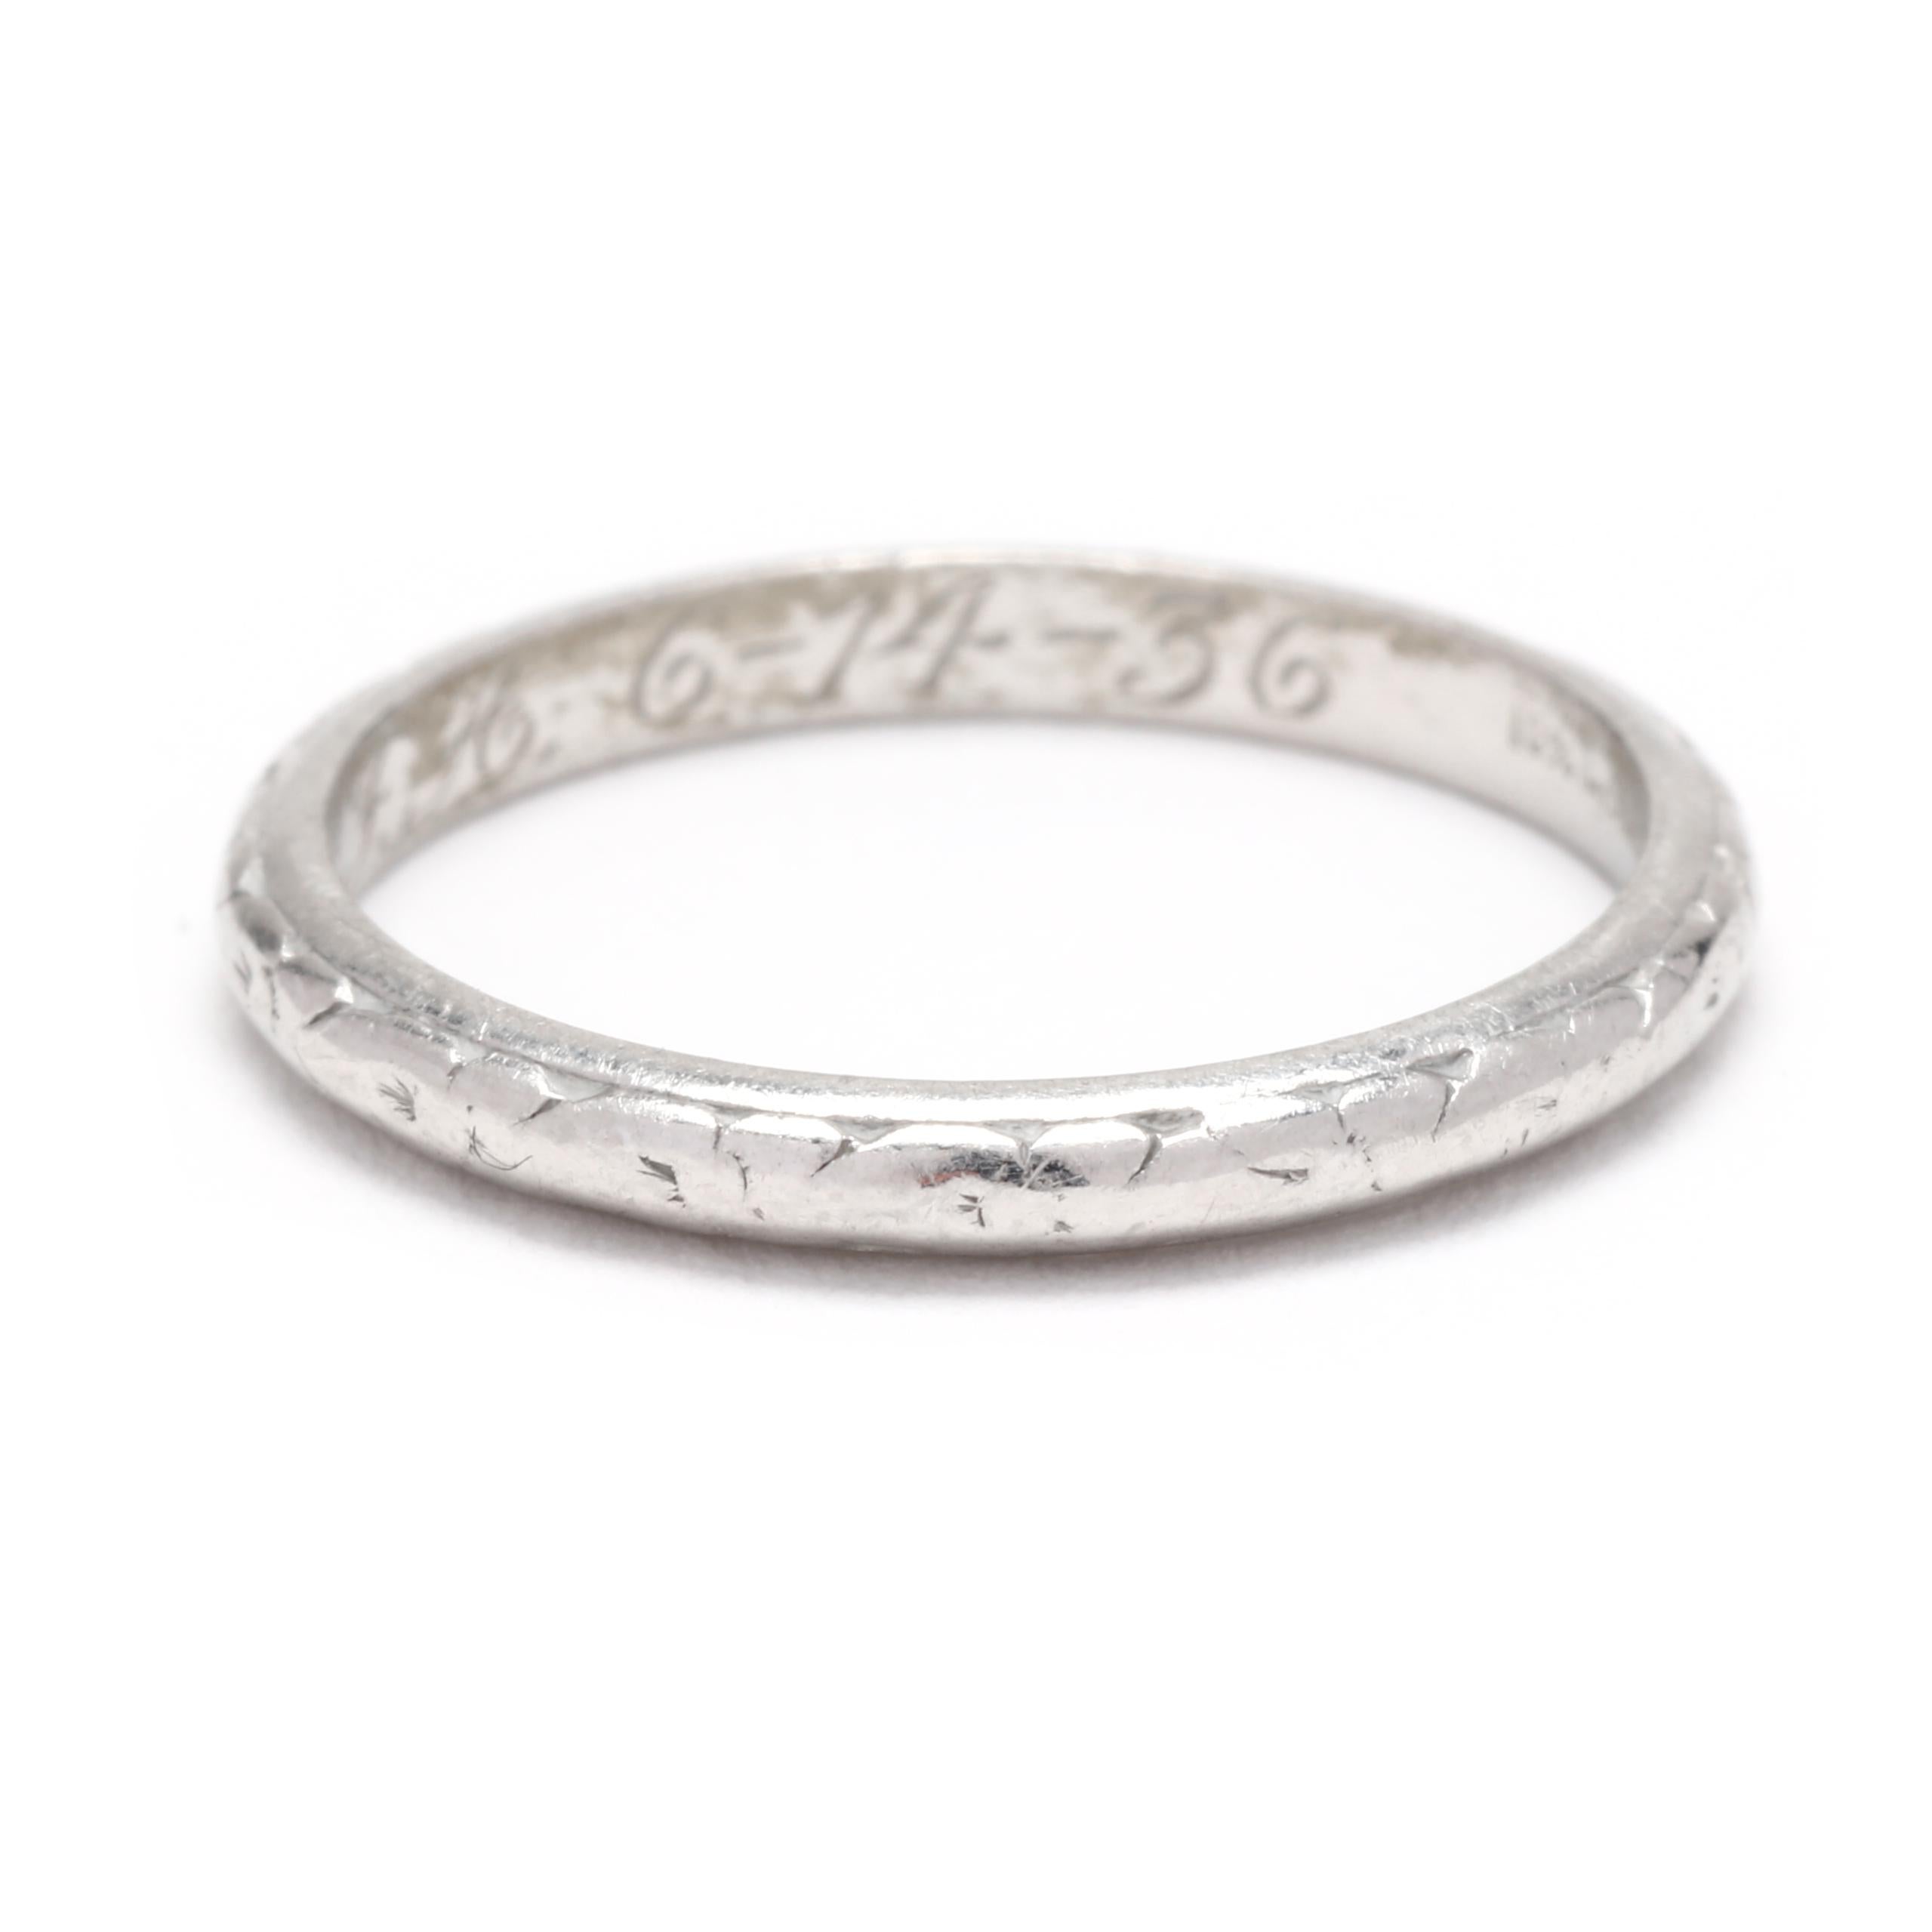 This Art Deco floral engraved wedding band is a stunning piece of jewelry that will add a touch of elegance and sophistication to any outfit. The band is crafted from Platinum, ensuring its durability and preciousness. The ring is a size 5.5 and